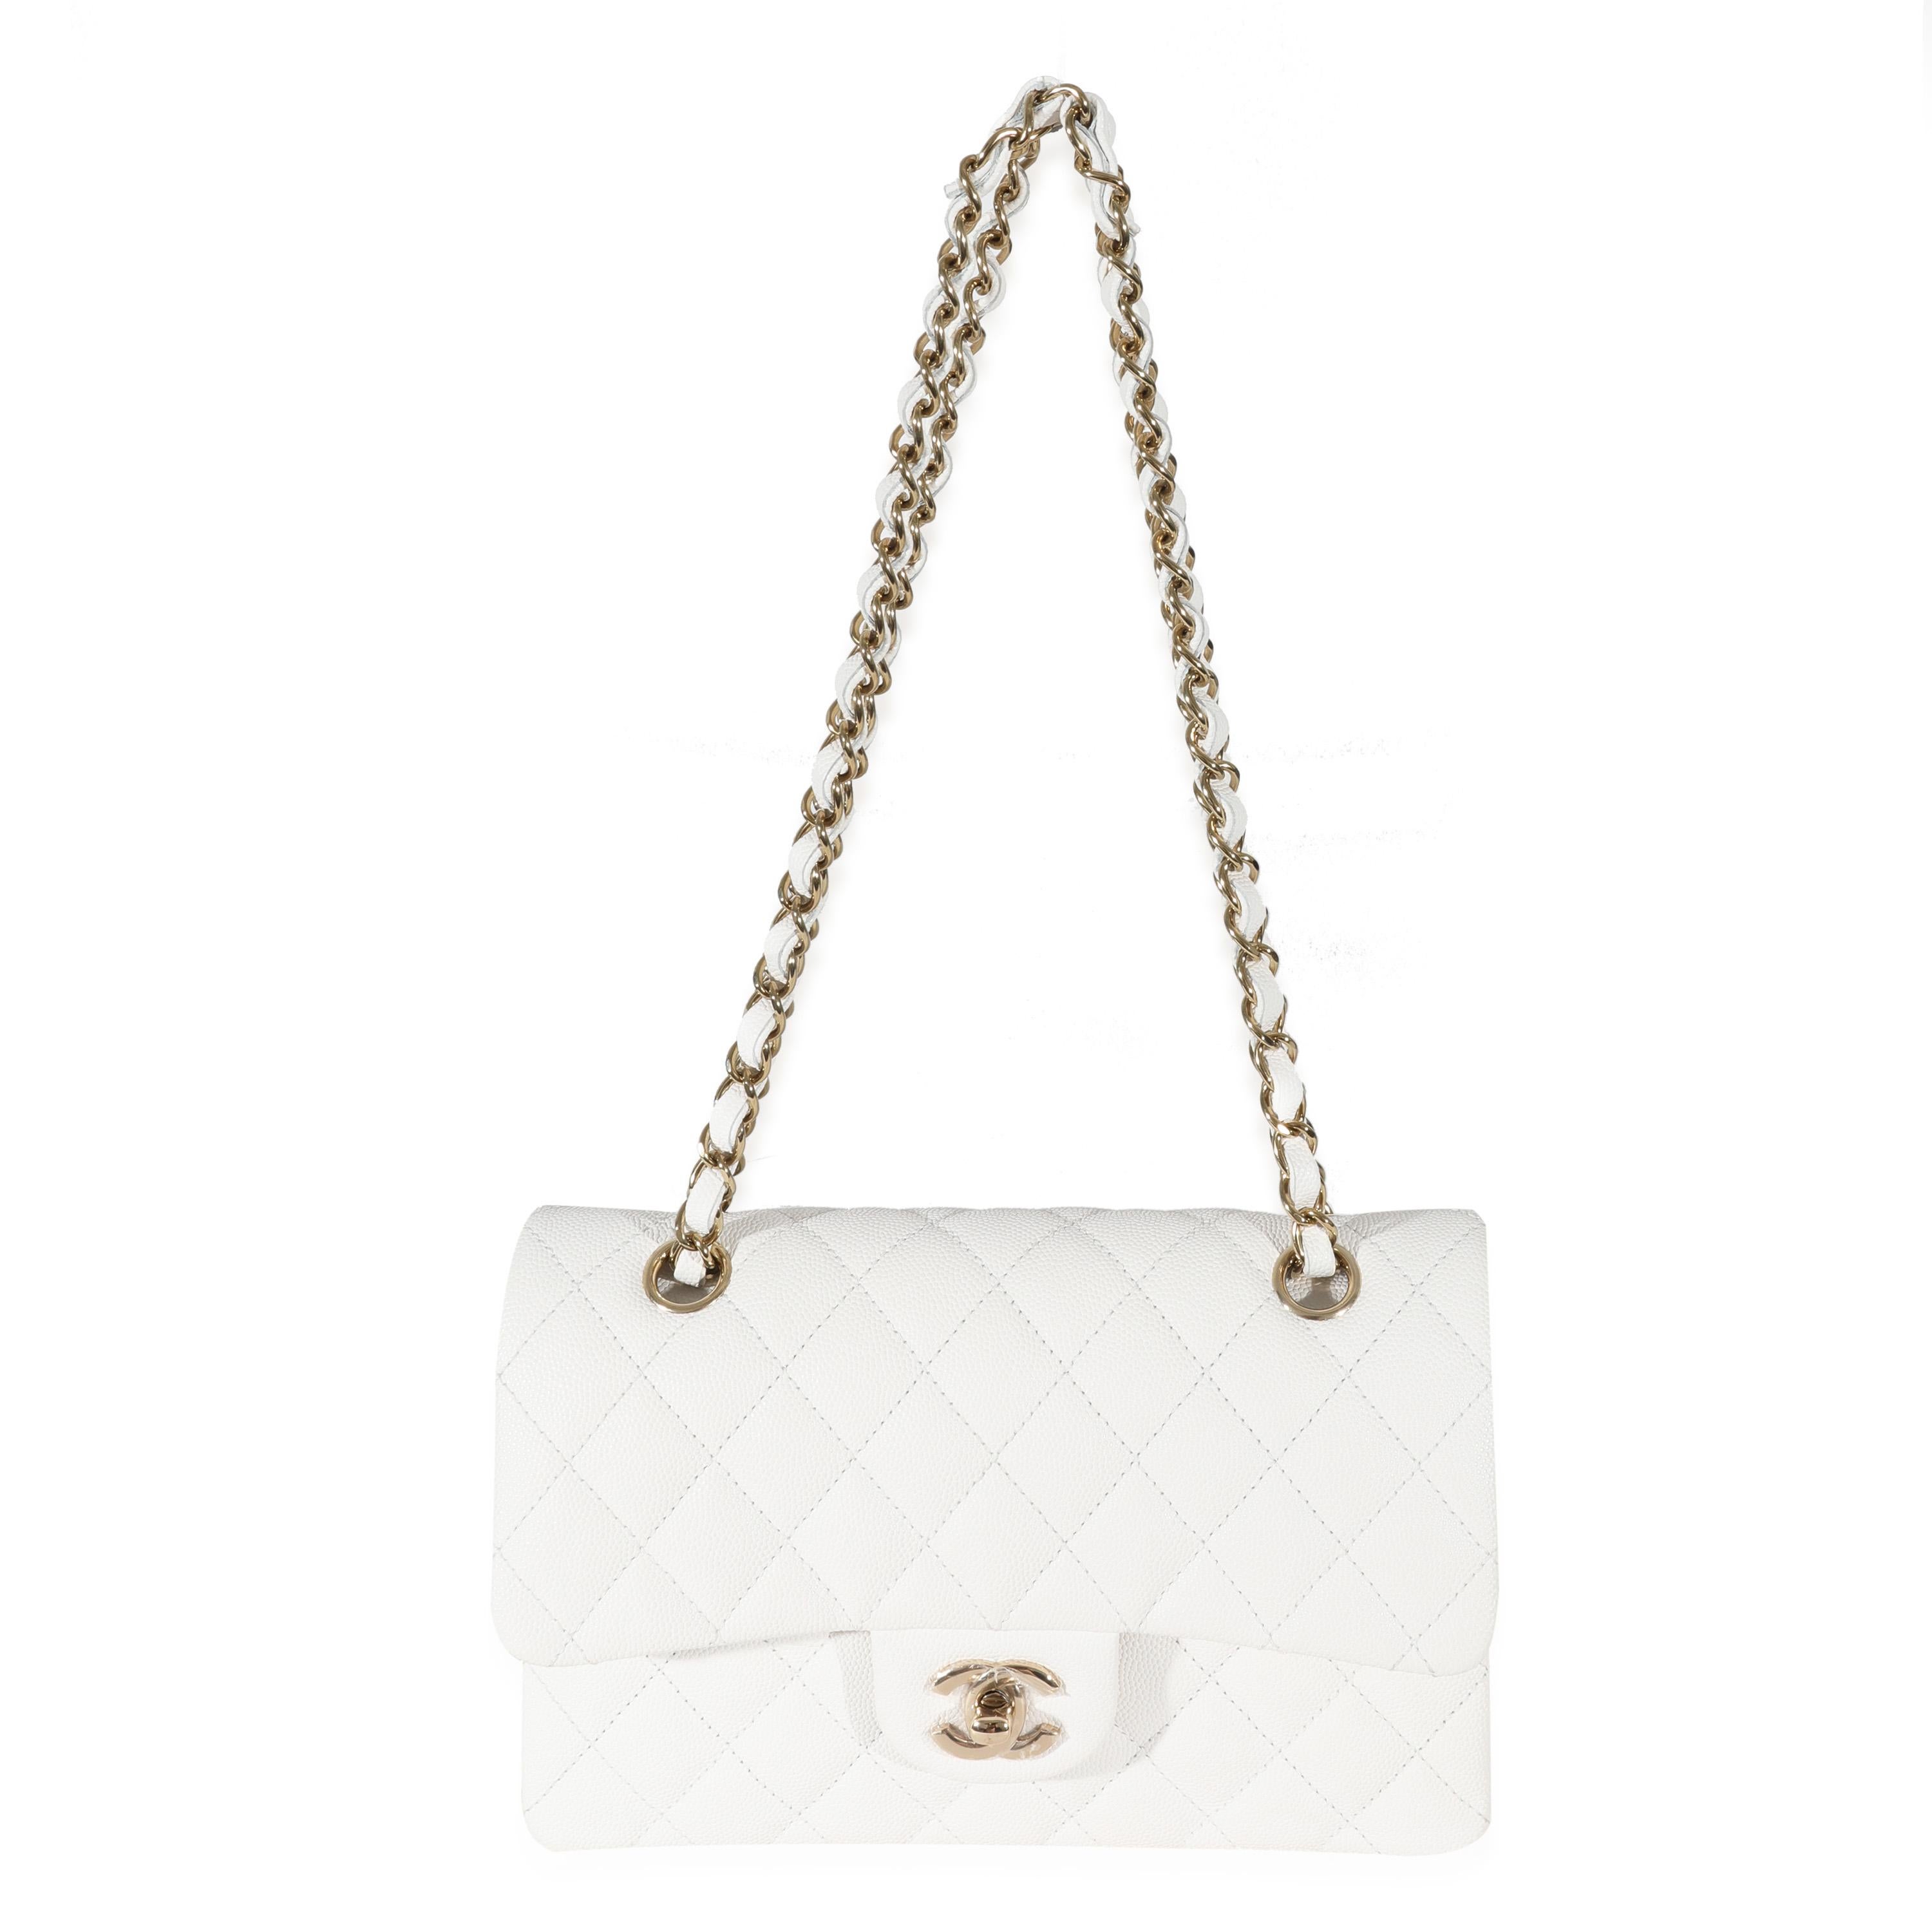 Listing Title: Chanel 23C White Caviar Small Classic Double Flap Bag
SKU: 131333
MSRP: 9600.00
Condition: Pre-owned 
Condition Description: A timeless classic that never goes out of style, the flap bag from Chanel dates back to 1955 and has seen a